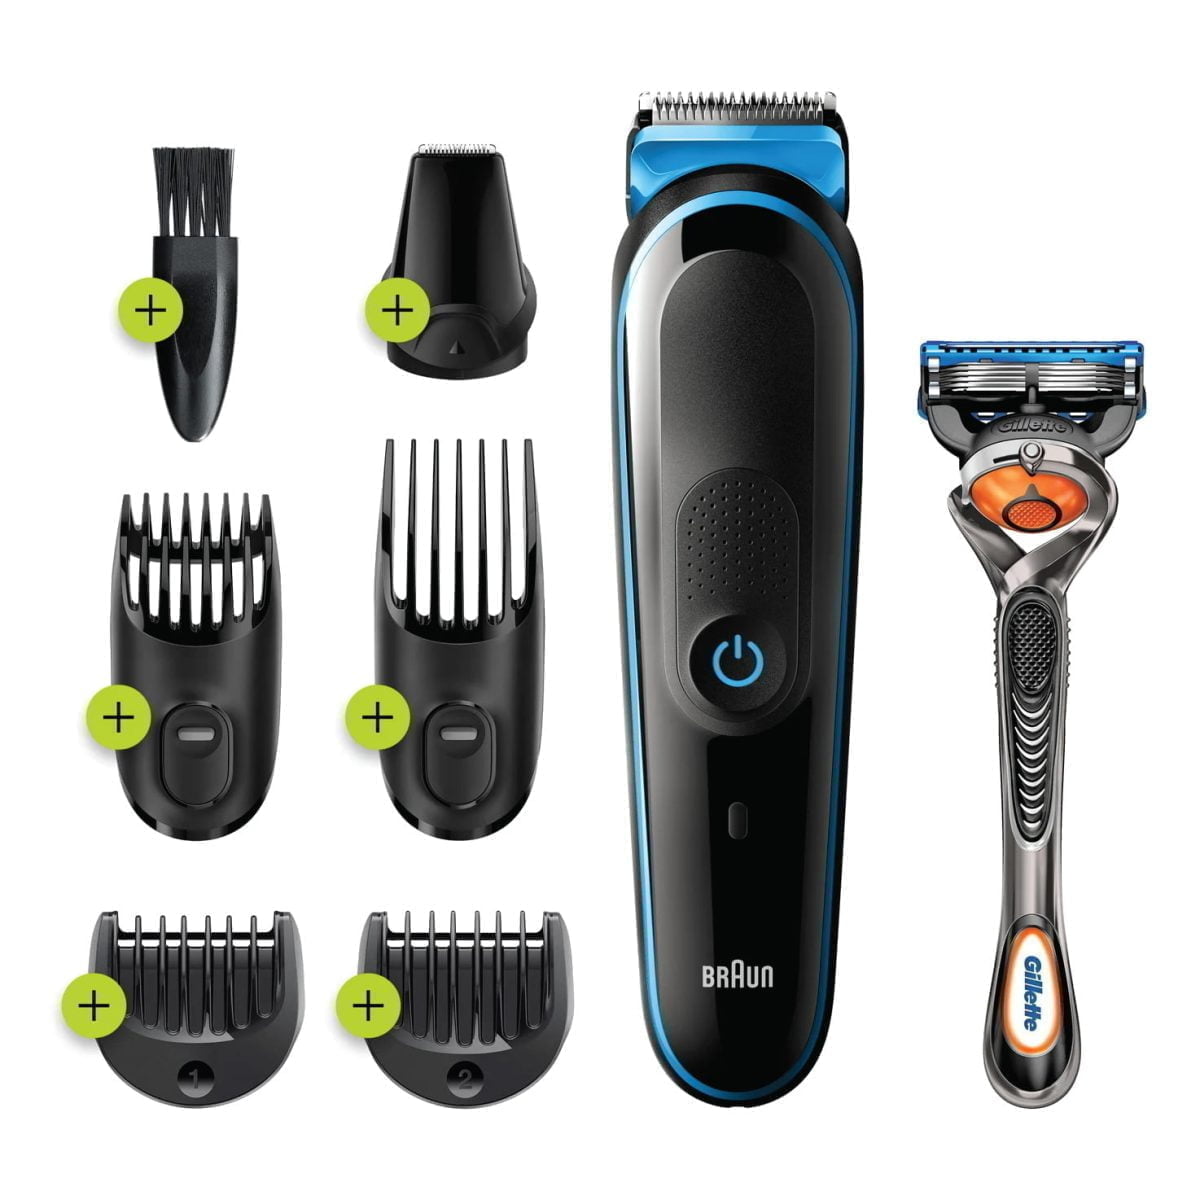 Razar 04 Braun &Lt;Div&Gt; &Lt;Div Class=&Quot;Inline-Block Font-Sans-Roma Text-S13-M13-L15 Text-Black Align-Top Mb-30&Quot;&Gt; &Lt;H1&Gt;Braun All-In-One Trimmer All-In-One Trimmer Mgk7, Design Edition, 9-In-1 Trimmer, Black&Lt;/H1&Gt; &Lt;/Div&Gt; &Lt;/Div&Gt; &Lt;Div Class=&Quot;Ps-Widget Event_Buy_Now Event_Buy_Now_Choose_Product Ps-No-Sku Ps-Disabled&Quot; Tabindex=&Quot;0&Quot; Role=&Quot;Button&Quot; Data-Ps-Account=&Quot;1766&Quot; Data-Action-Detail=&Quot;0069055888919&Quot; Aria-Disabled=&Quot;True&Quot; Aria-Label=&Quot;No Sellers Found&Quot;&Gt; &Lt;Ul&Gt; &Lt;Li&Gt;9-In-1: Foil Shaver, Beard Trimmer, Body Groomer, Ear And Nose Trimmer Hair Clippers For Men&Lt;/Li&Gt; &Lt;Li&Gt;Design Edition: Men’s Hair Trimmer Kit With Exclusive Travel Case For Braun’s 100 Year Anniversary&Lt;/Li&Gt; &Lt;Li&Gt;Lifetime-Sharp Metal Blades: German Design, Built To Last. Beard Trimmer Comes With A 5-Year Warranty¹&Lt;/Li&Gt; &Lt;Li&Gt;2 Fixed Combs, 2 Sliding Combs: Precisely Achieve Beard Lengths Between 0.5 - 21 Mm&Lt;/Li&Gt; &Lt;Li&Gt;Li-Ion Battery For Up To 100 Mins Of Trimming. 5 Min Quick-Charge For One Trim&Lt;/Li&Gt; &Lt;Li&Gt;No More Patchiness: This Trimmer'S Autosensing Motor Adjusts To The Exact Density Of Your Beard&Lt;/Li&Gt; &Lt;/Ul&Gt; &Lt;/Div&Gt; Braun Braun All-In-One Trimmer, 9-In-1 Trimmer-Black